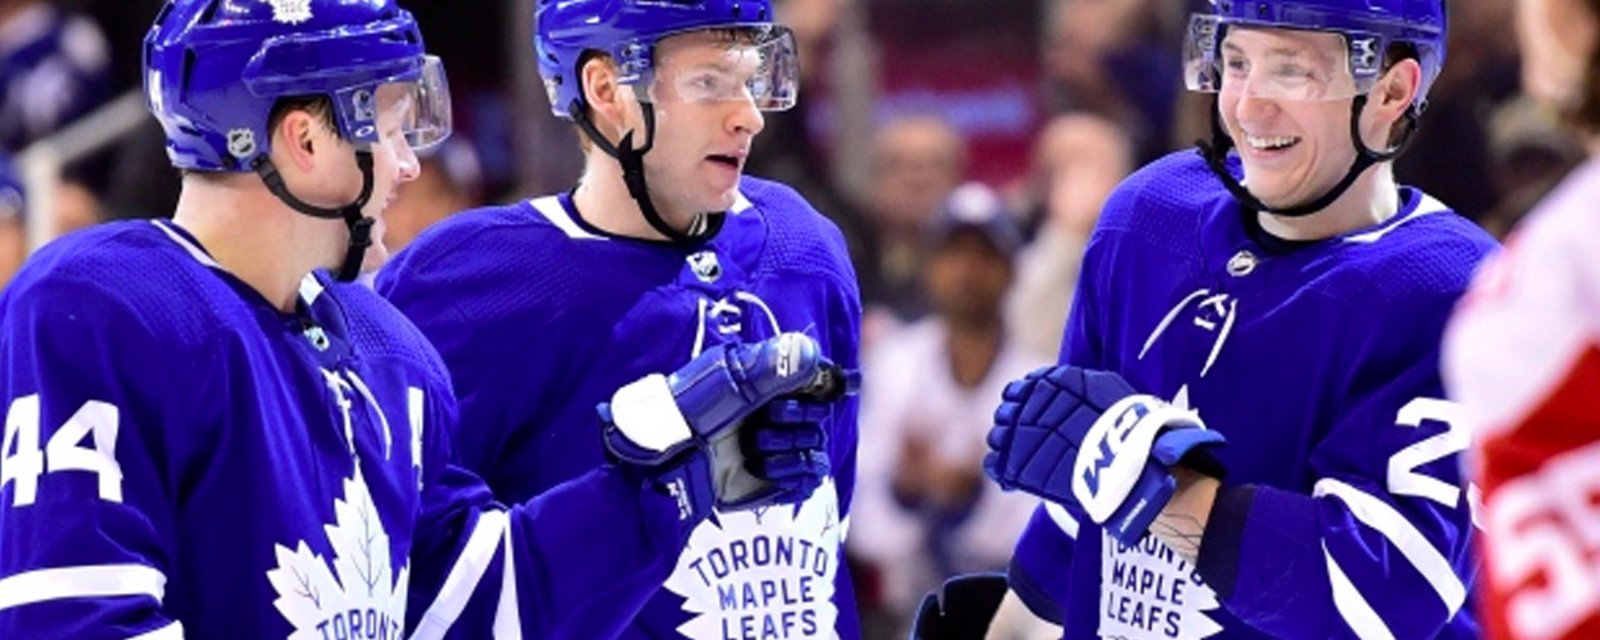 Breaking: Leafs defenseman out 6 months after shoulder surgery